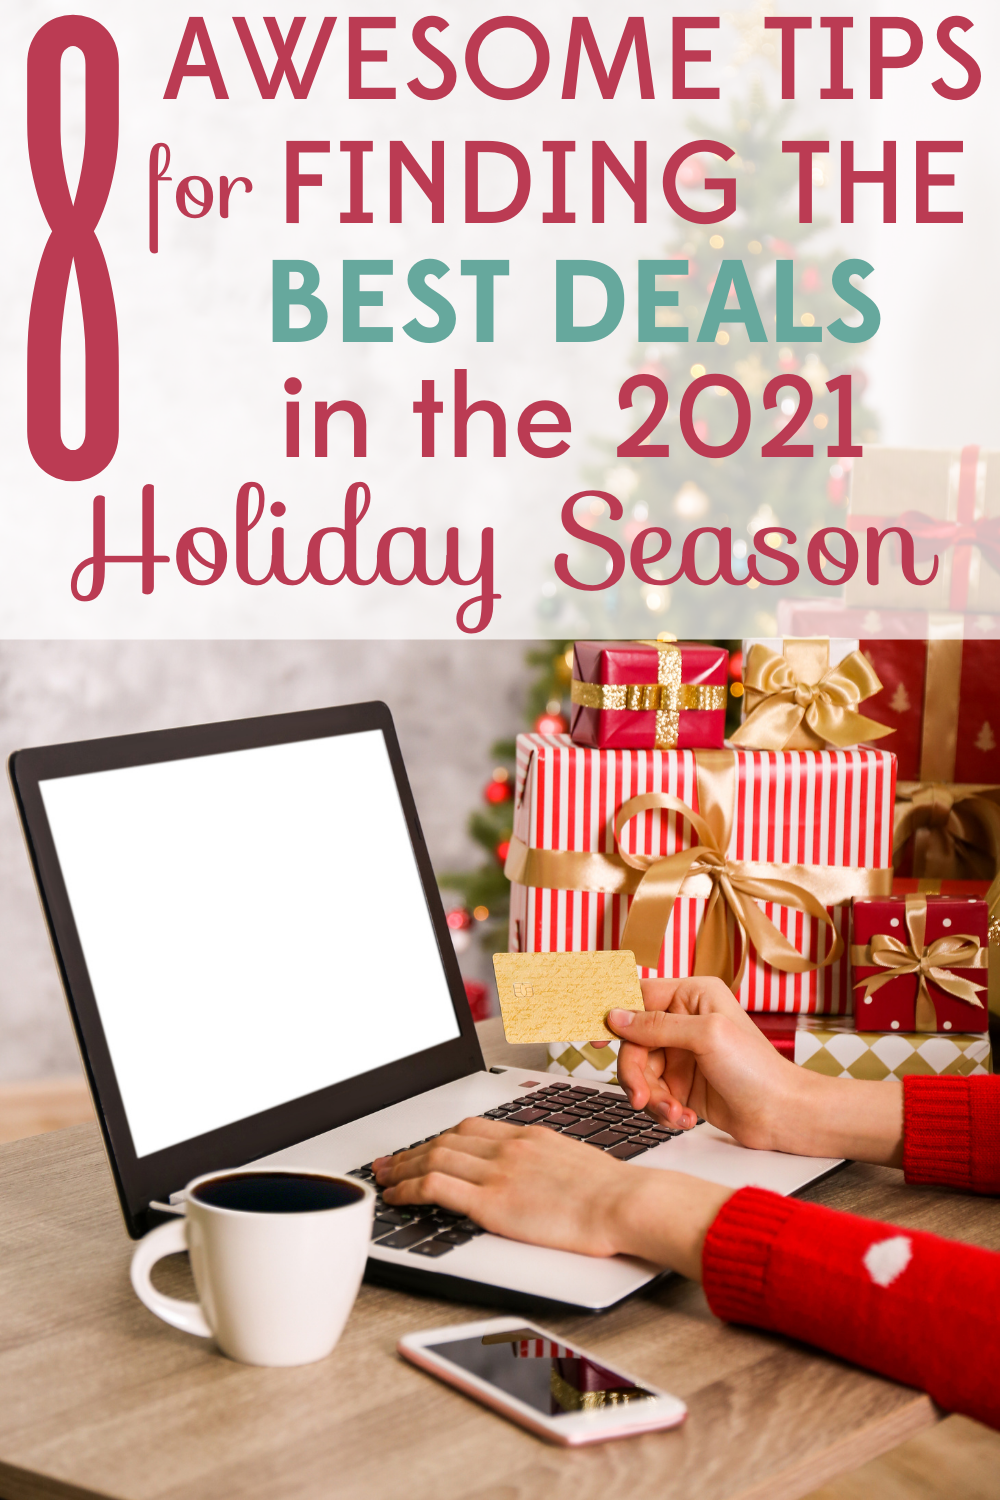 You can't count on your usual shopping strategies this year. We have 8 awesome tips for finding the best deals in the 2021 holiday season!